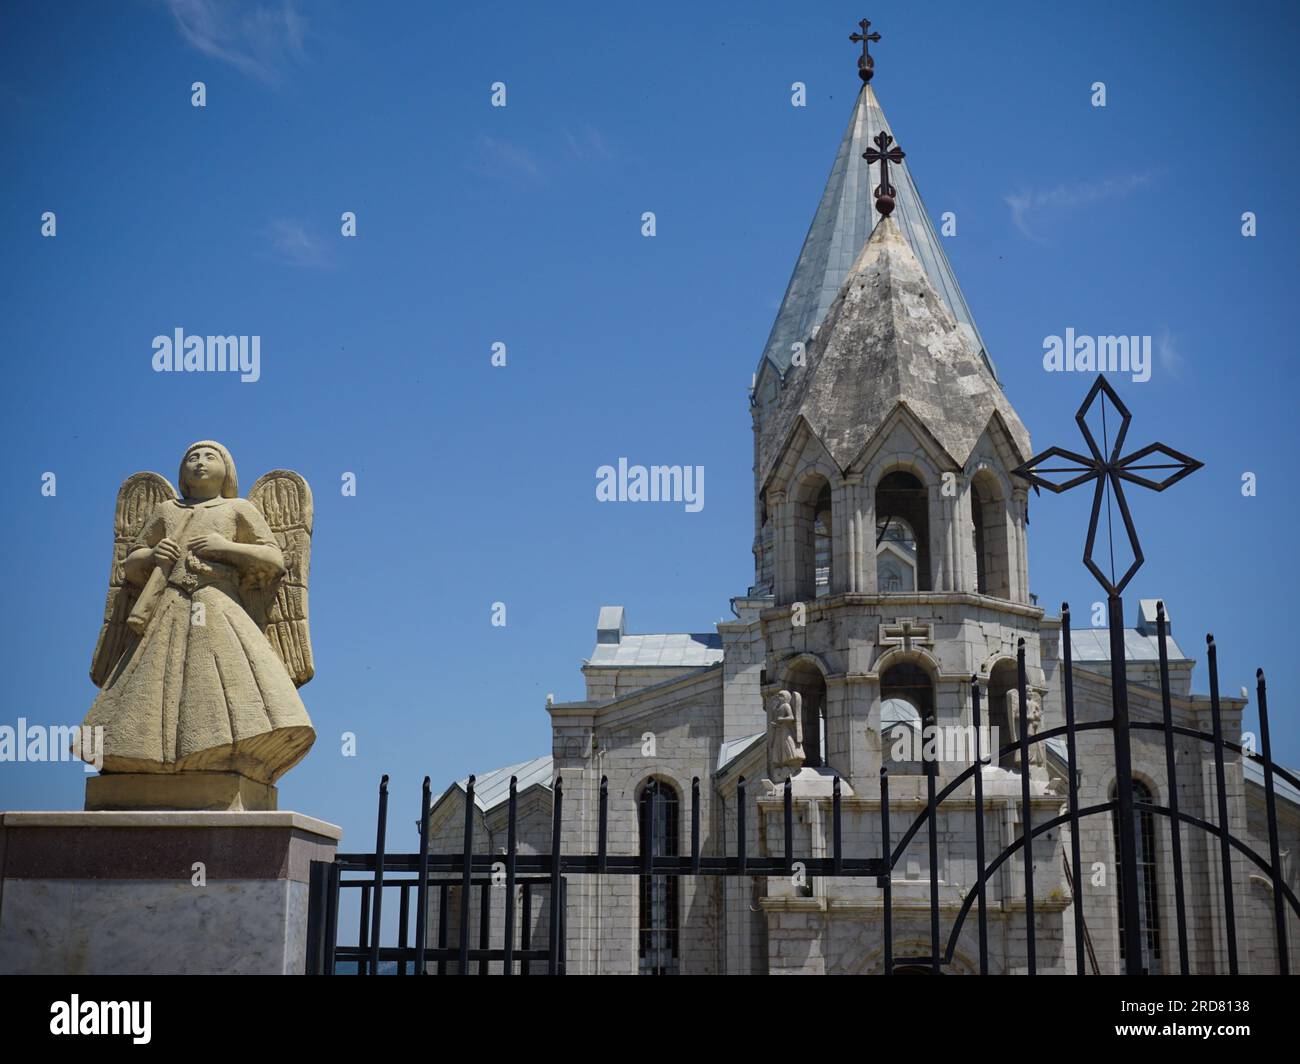 Stepanakert, Azerbaijan. 13th June, 2019. The exterior of the Ghazanchetsots Cathedral in Shusha, Nagorno-Karabakh. The unrecognised yet de facto independent country in South Caucasus, Nagorno-Karabakh (also known as Artsakh) has been in the longest-running territorial dispute between Azerbaijan and Armenia in post-Soviet Eurasia since the collapse of Soviet Union. It is mainly populated by ethnic Armenians. (Photo by Jasmine Leung/SOPA Images/Sipa USA) Credit: Sipa USA/Alamy Live News Stock Photo